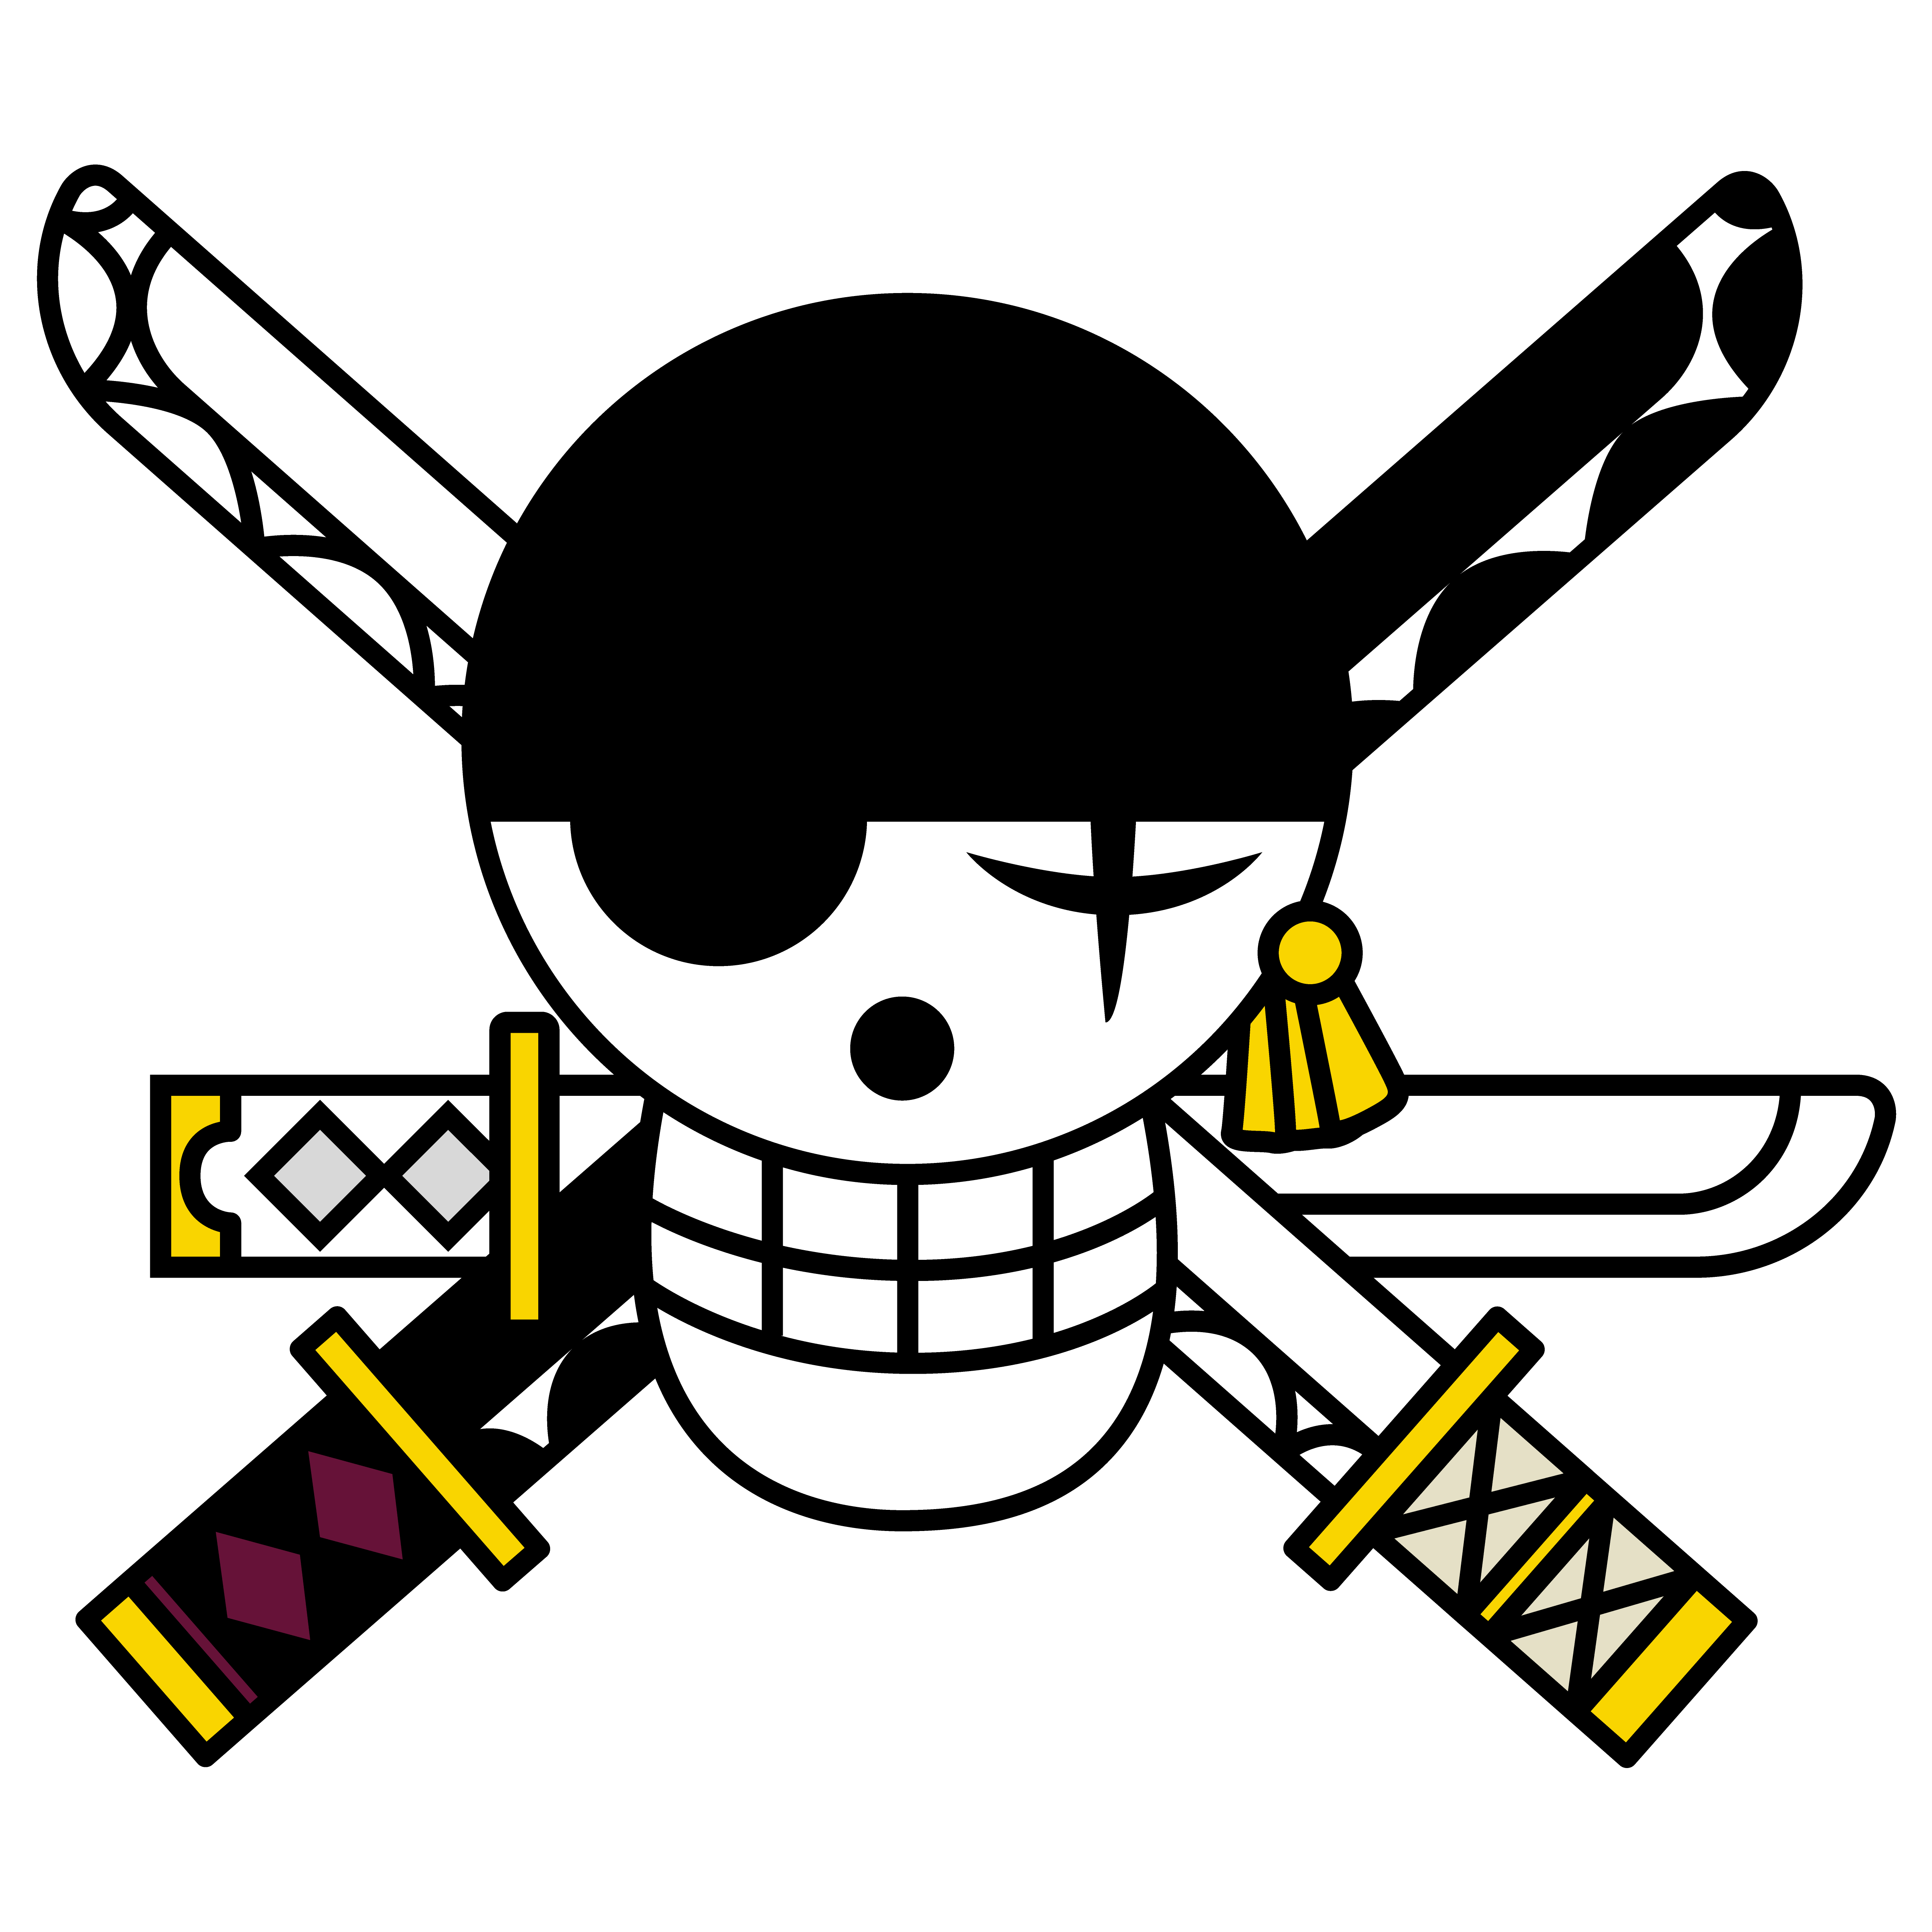 one piece, One-eyed pirate, sword, crossed logo #78